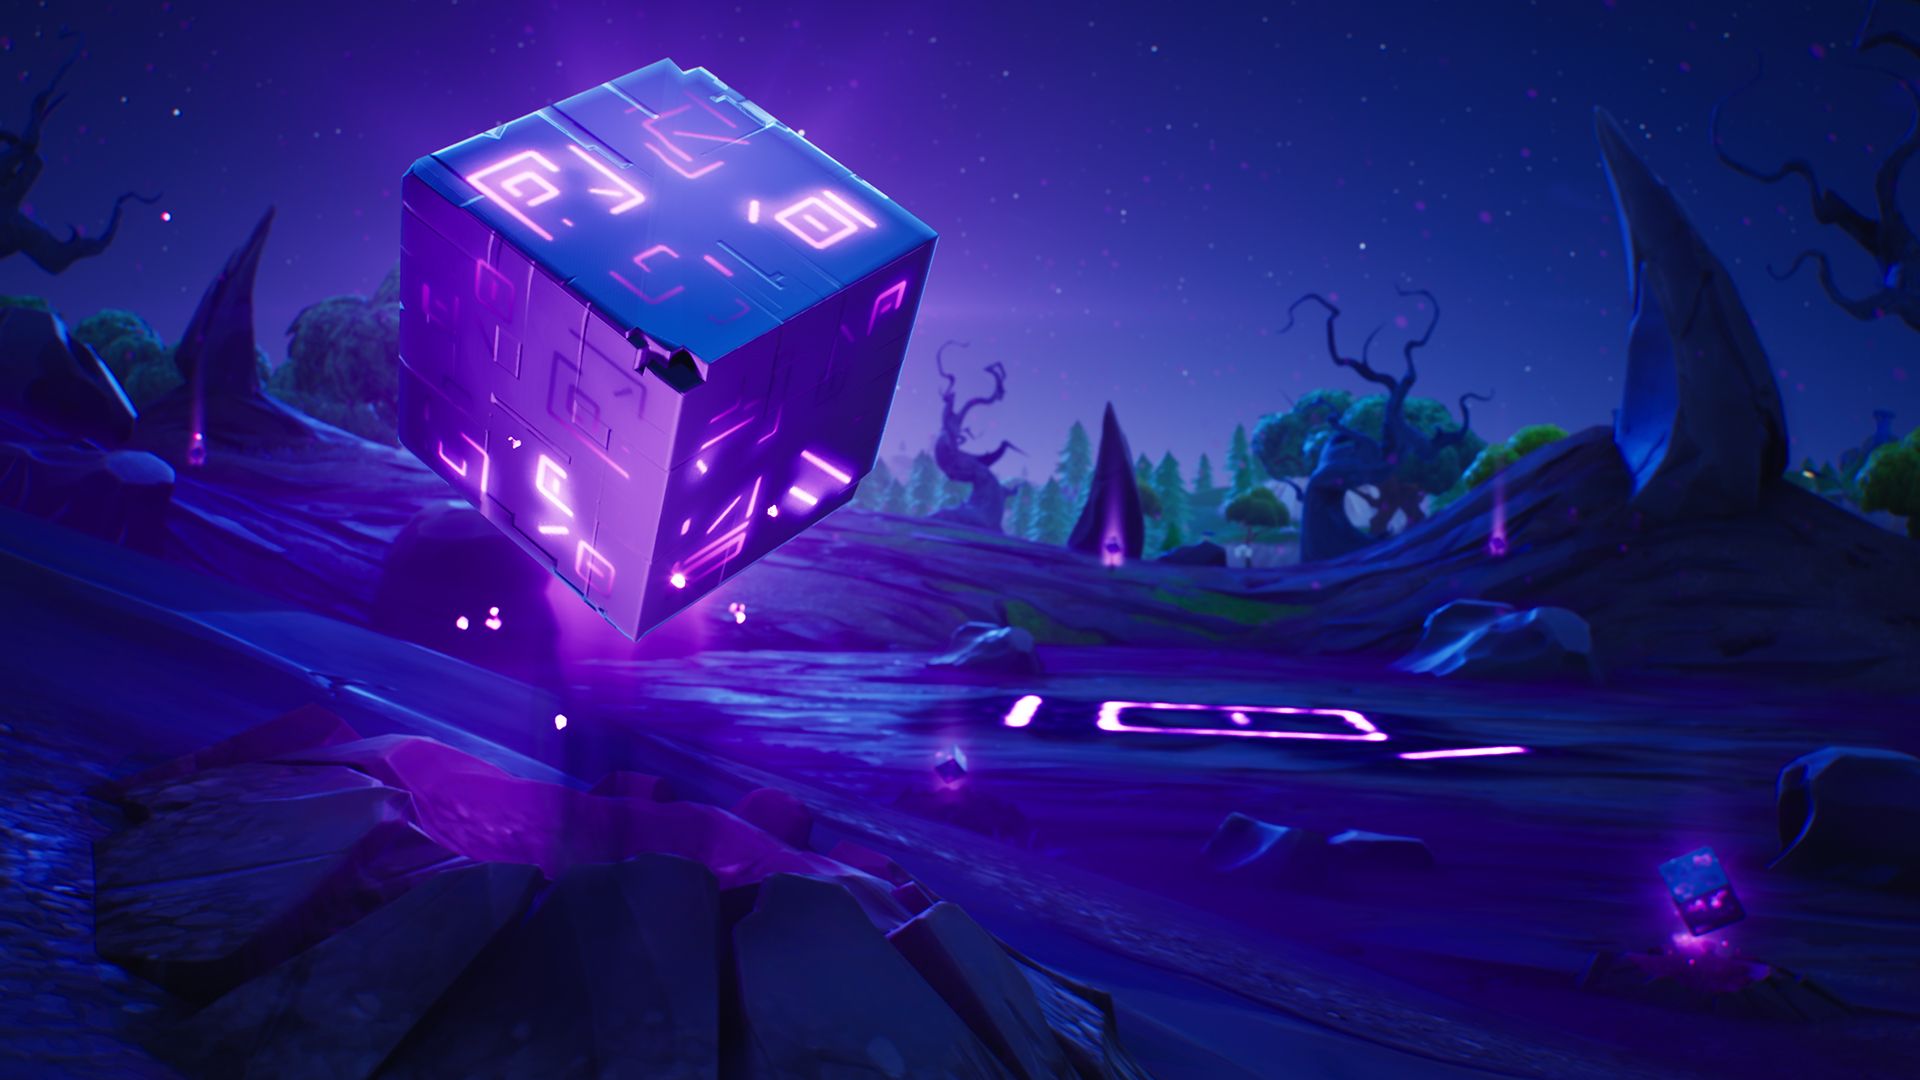 Patch Notes for v6.0 - Season 6 begins, Shadow Stones, and more